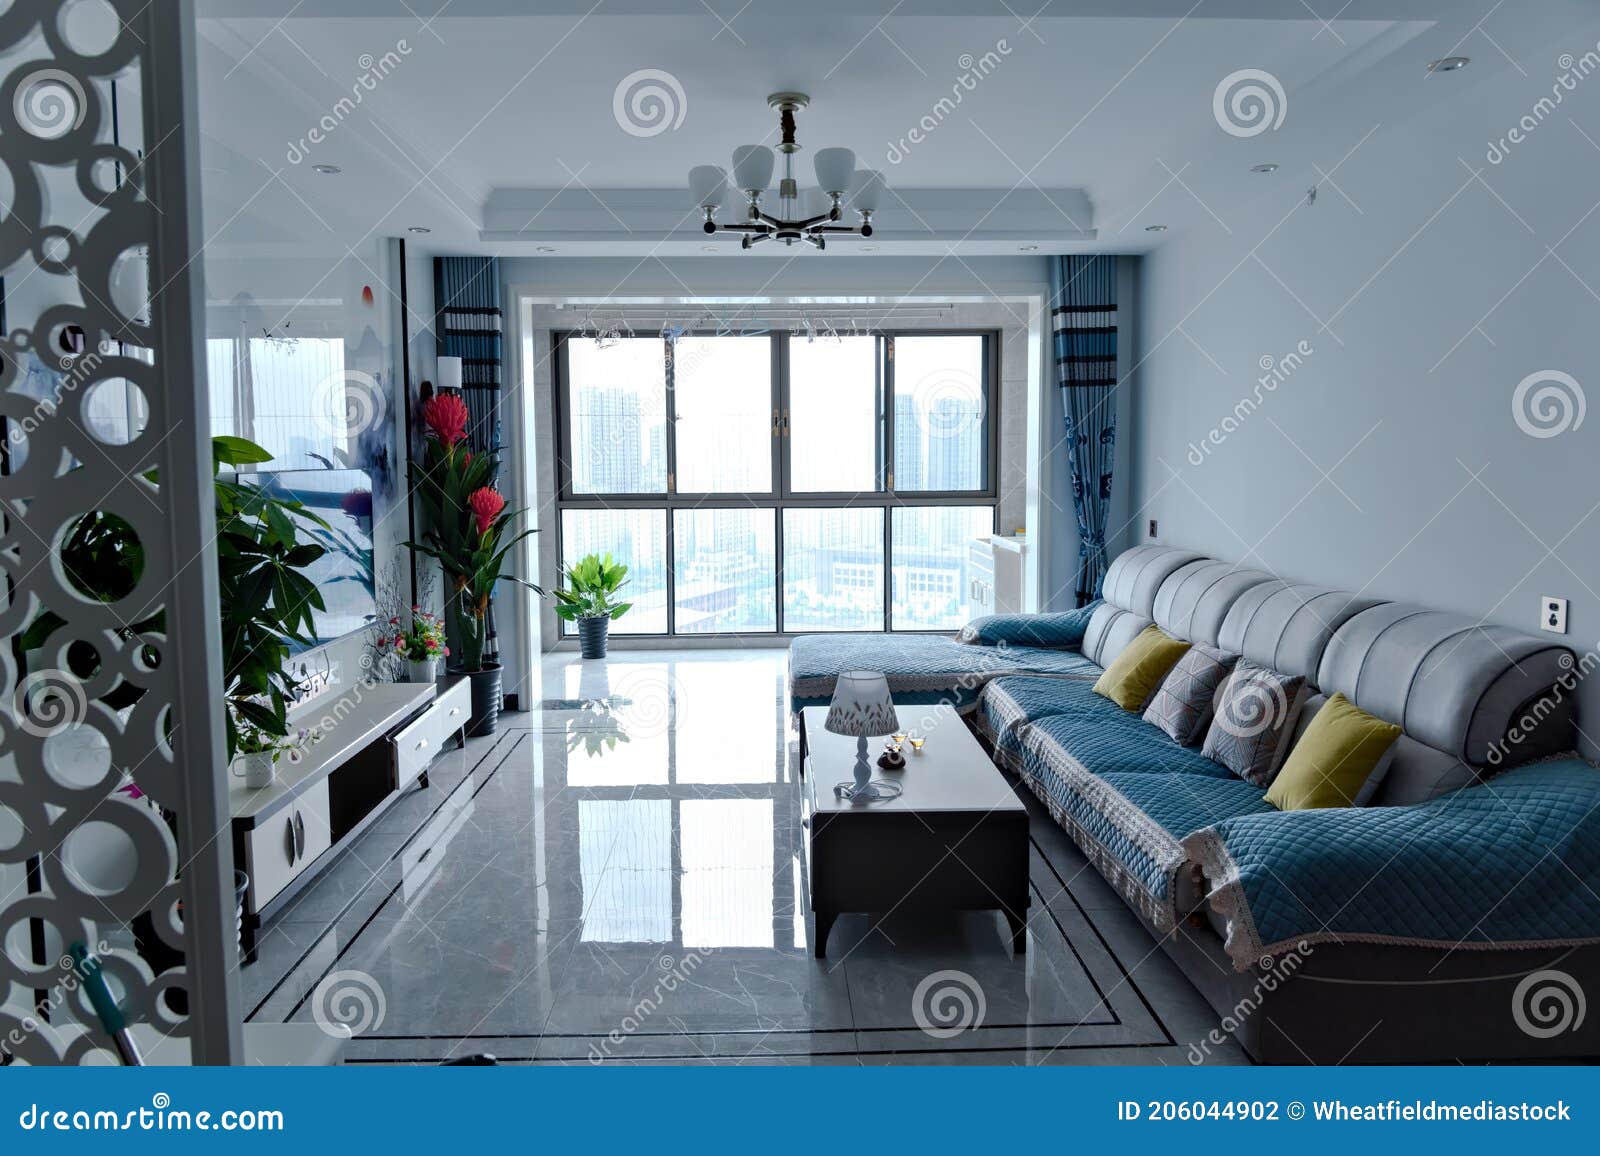 Morden Apartment Interior, New Home Decoration, Simple Style ...